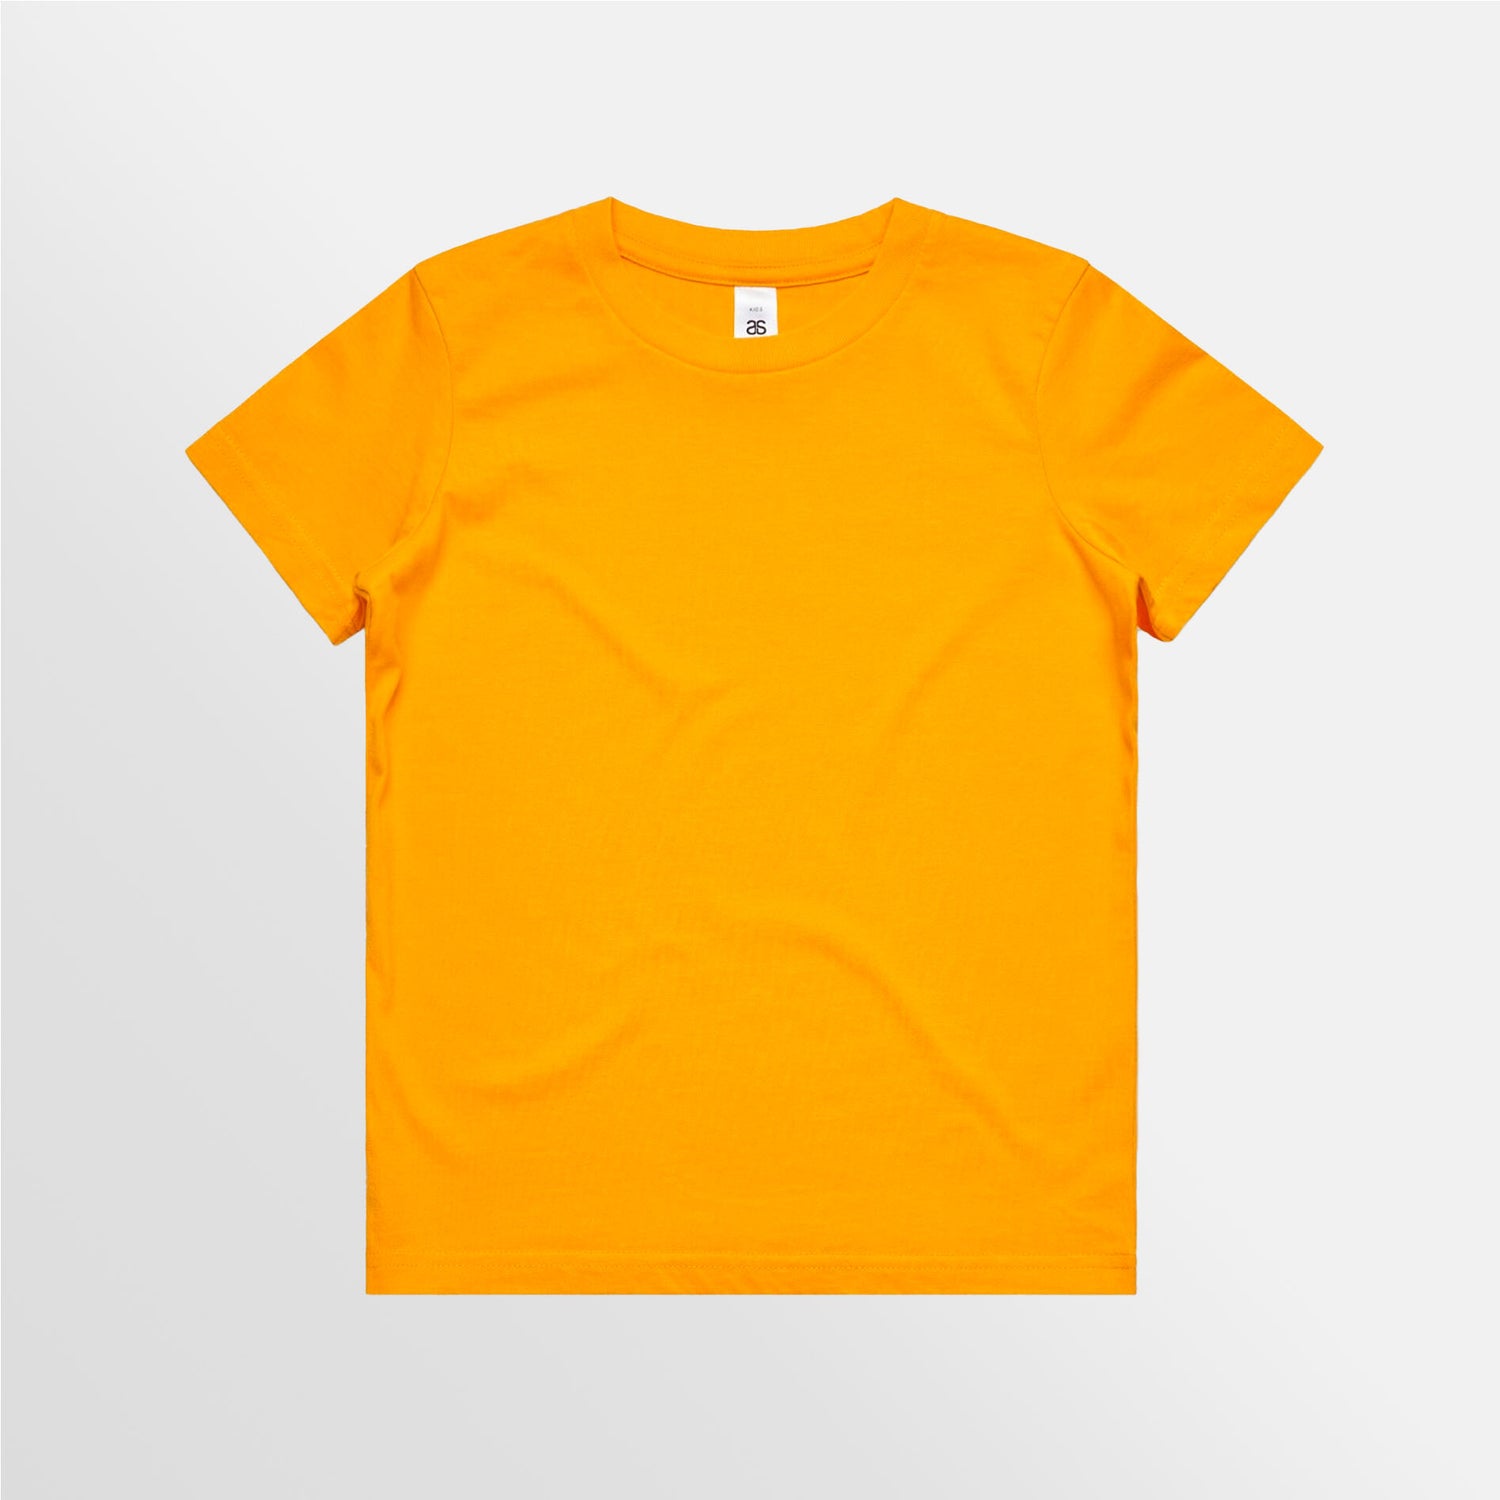 Premium Youth Tee - On Request